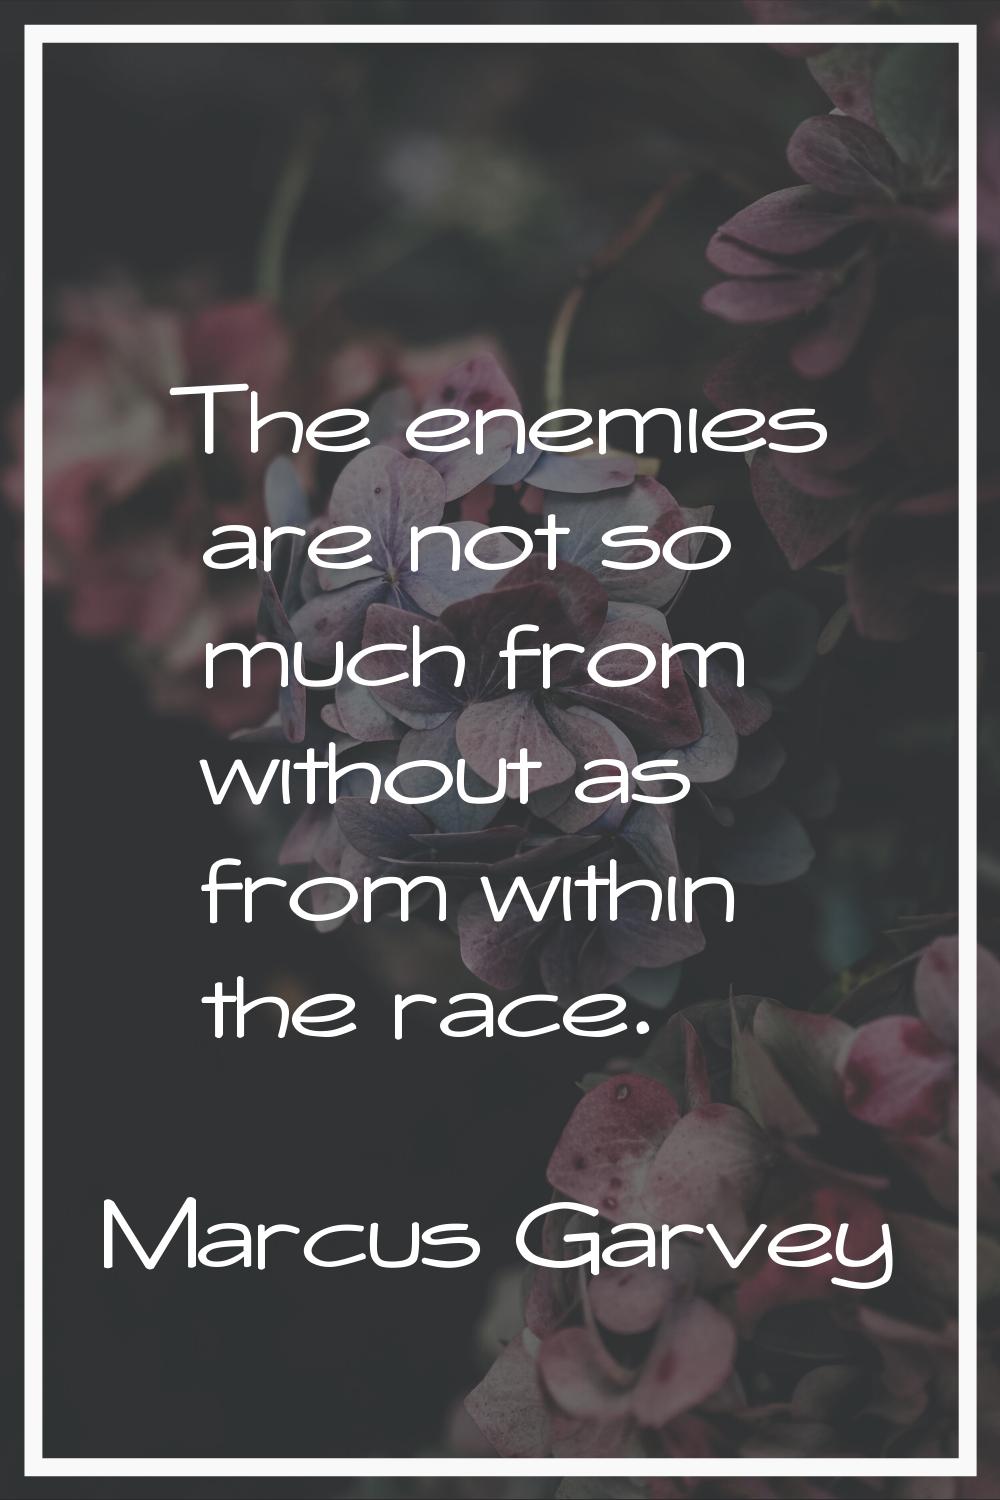 The enemies are not so much from without as from within the race.